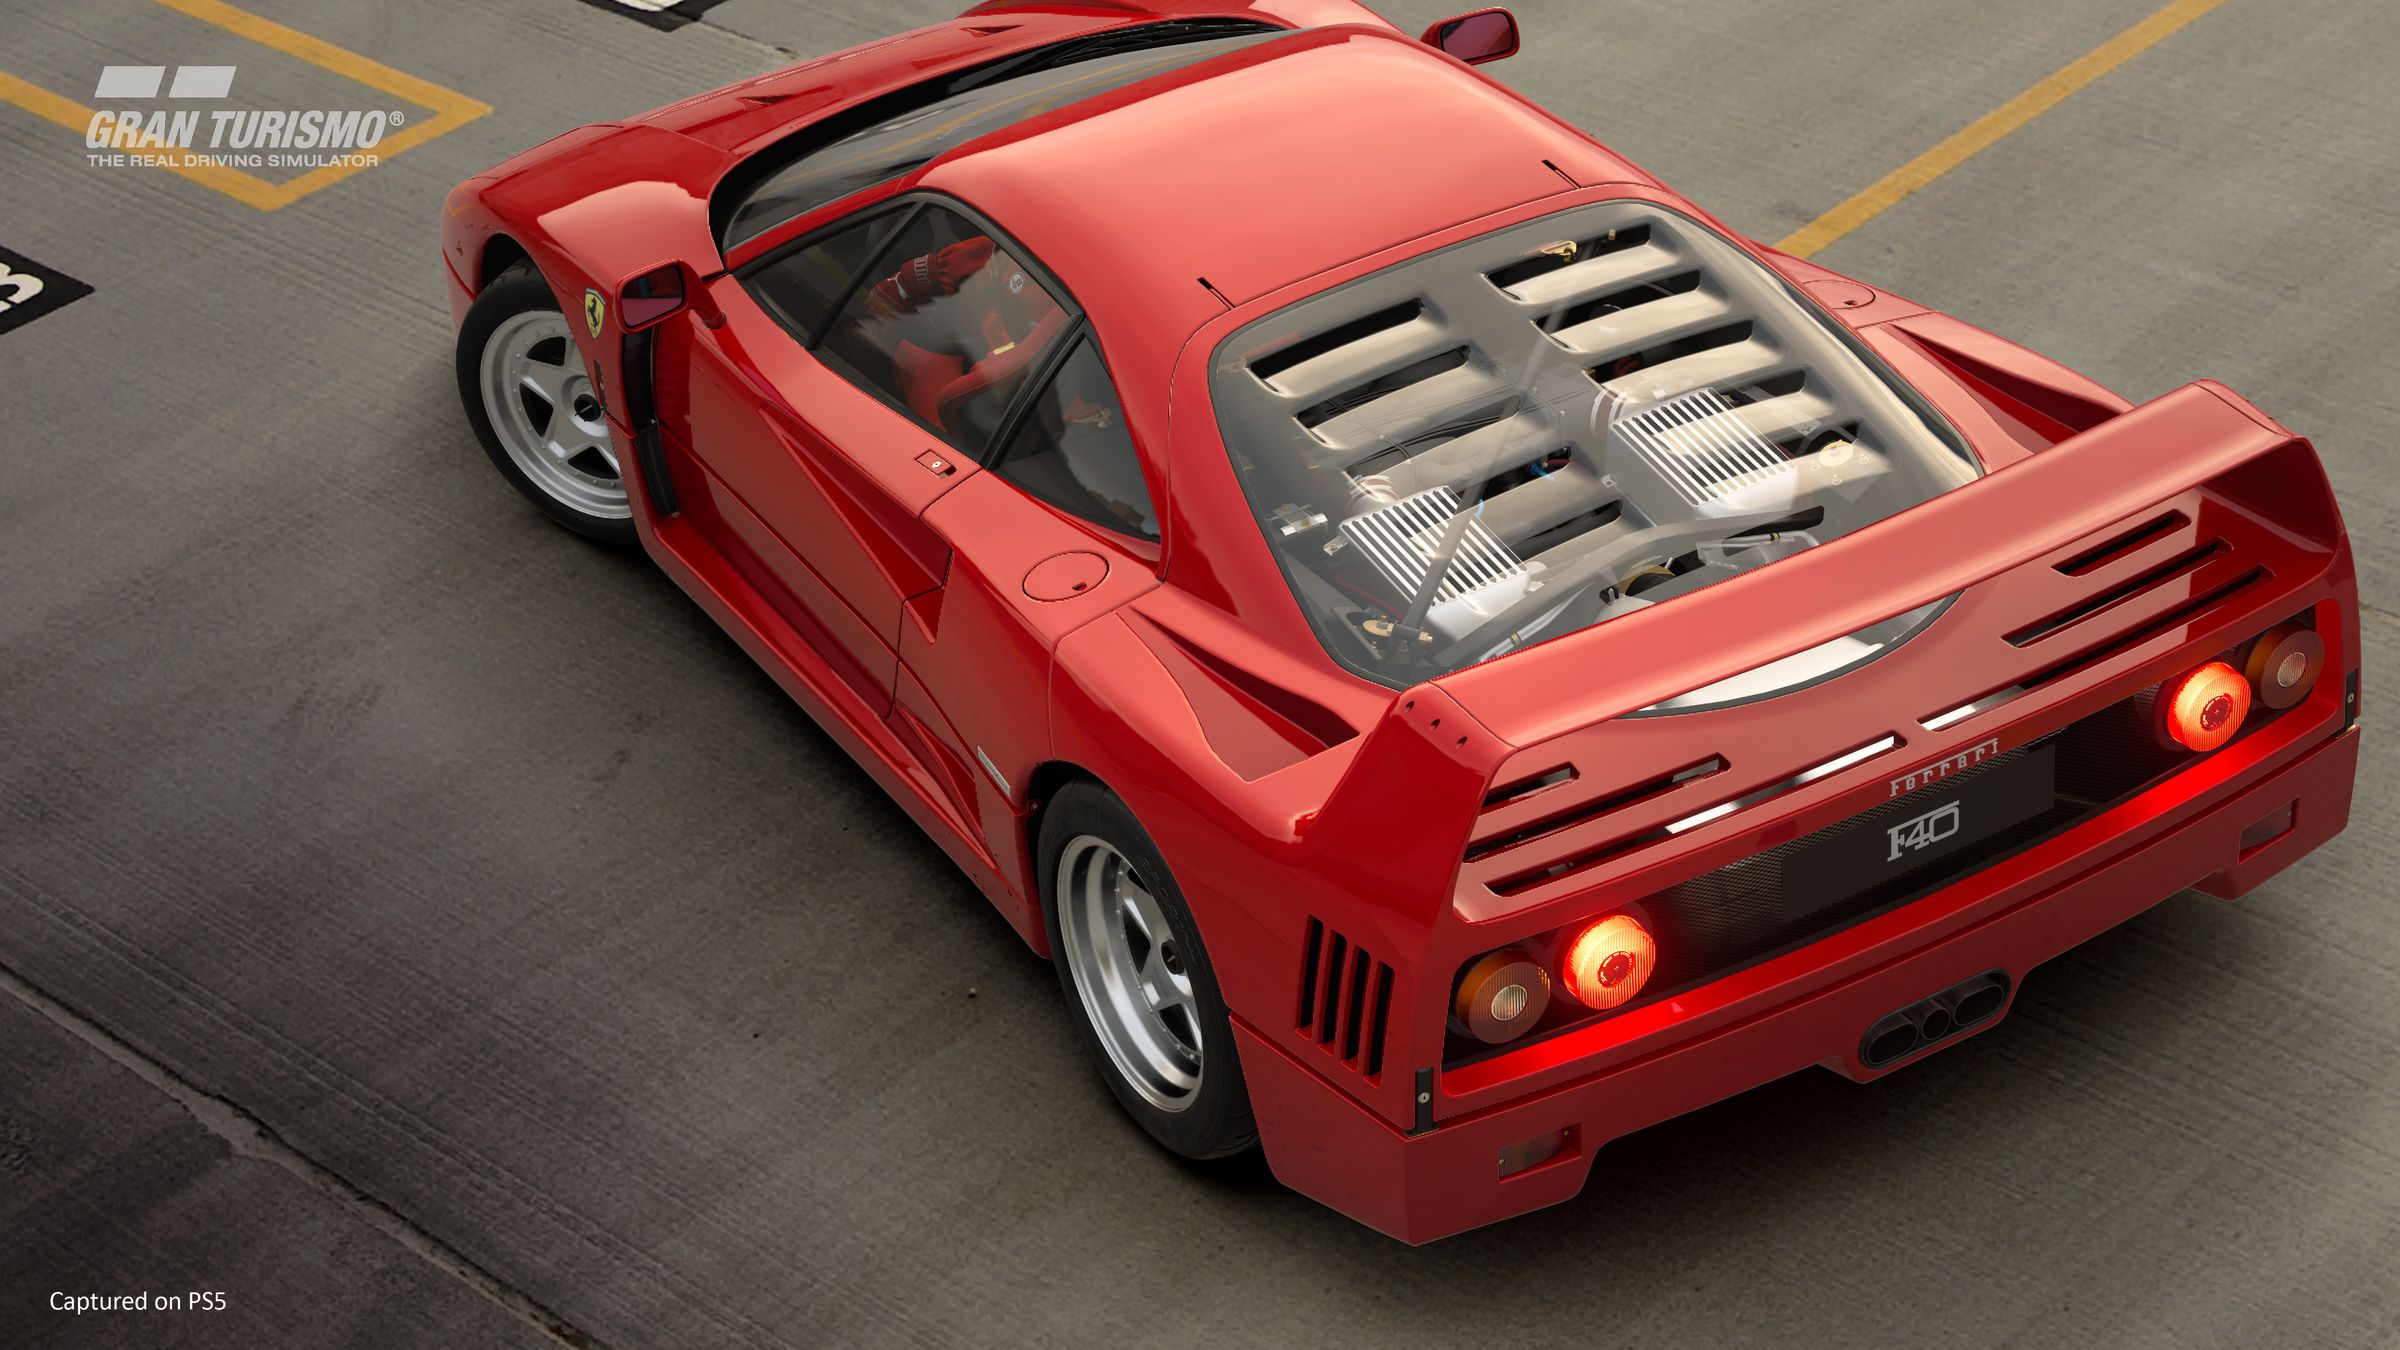 An image showing a vehicle in Gran Turismo 7